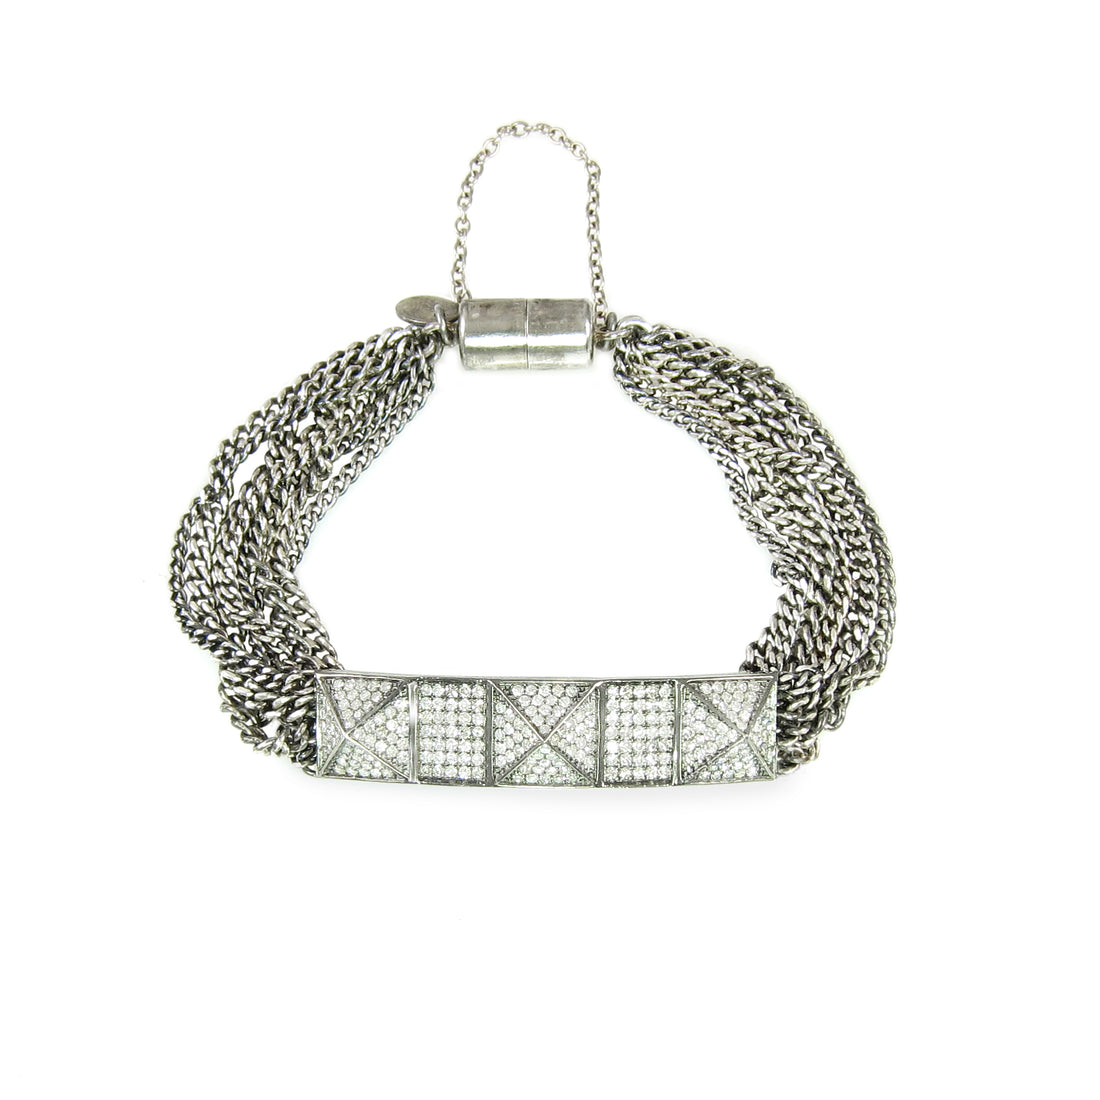 A beautiful bracelet with diamond pyramids with curb chains and magnetic clasp.